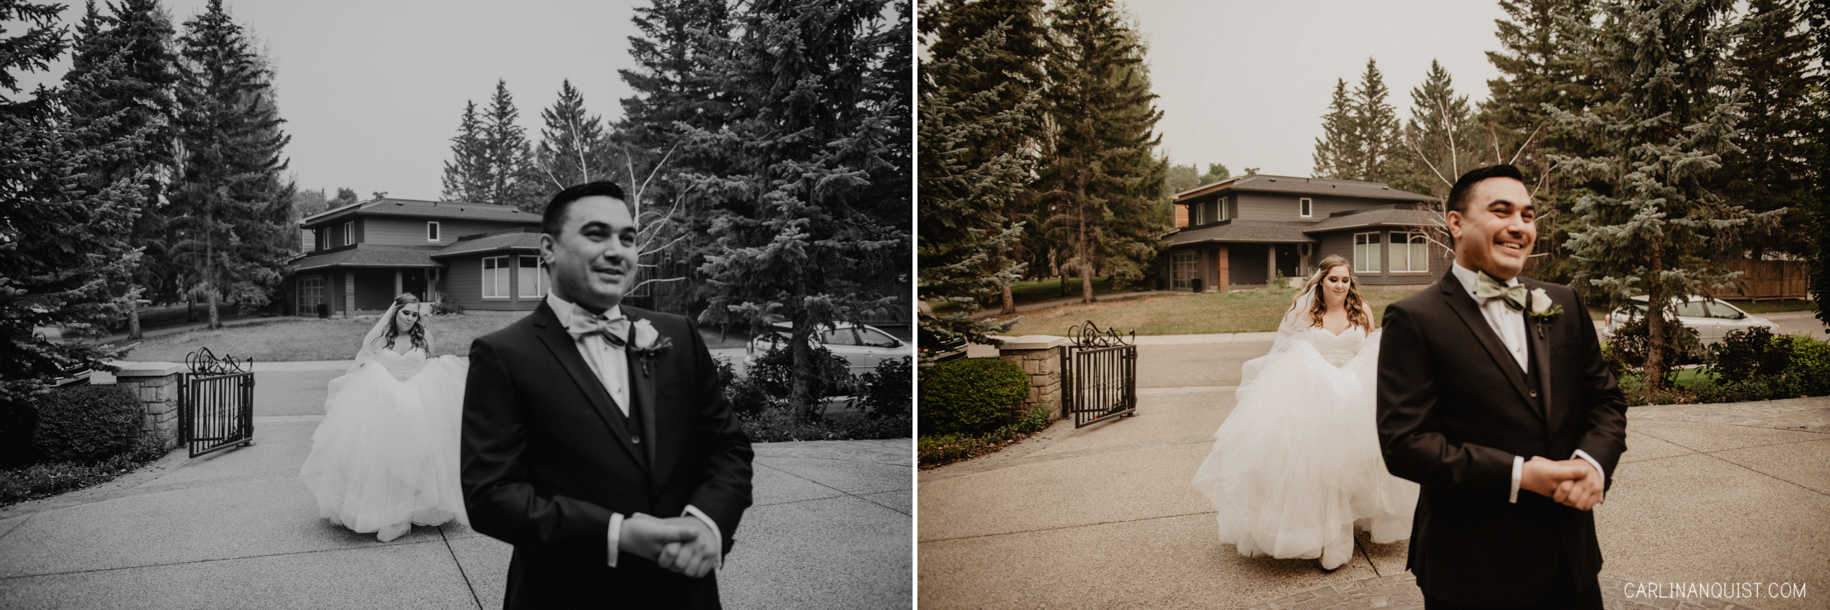 First Look | The Lake House Wedding Photographer